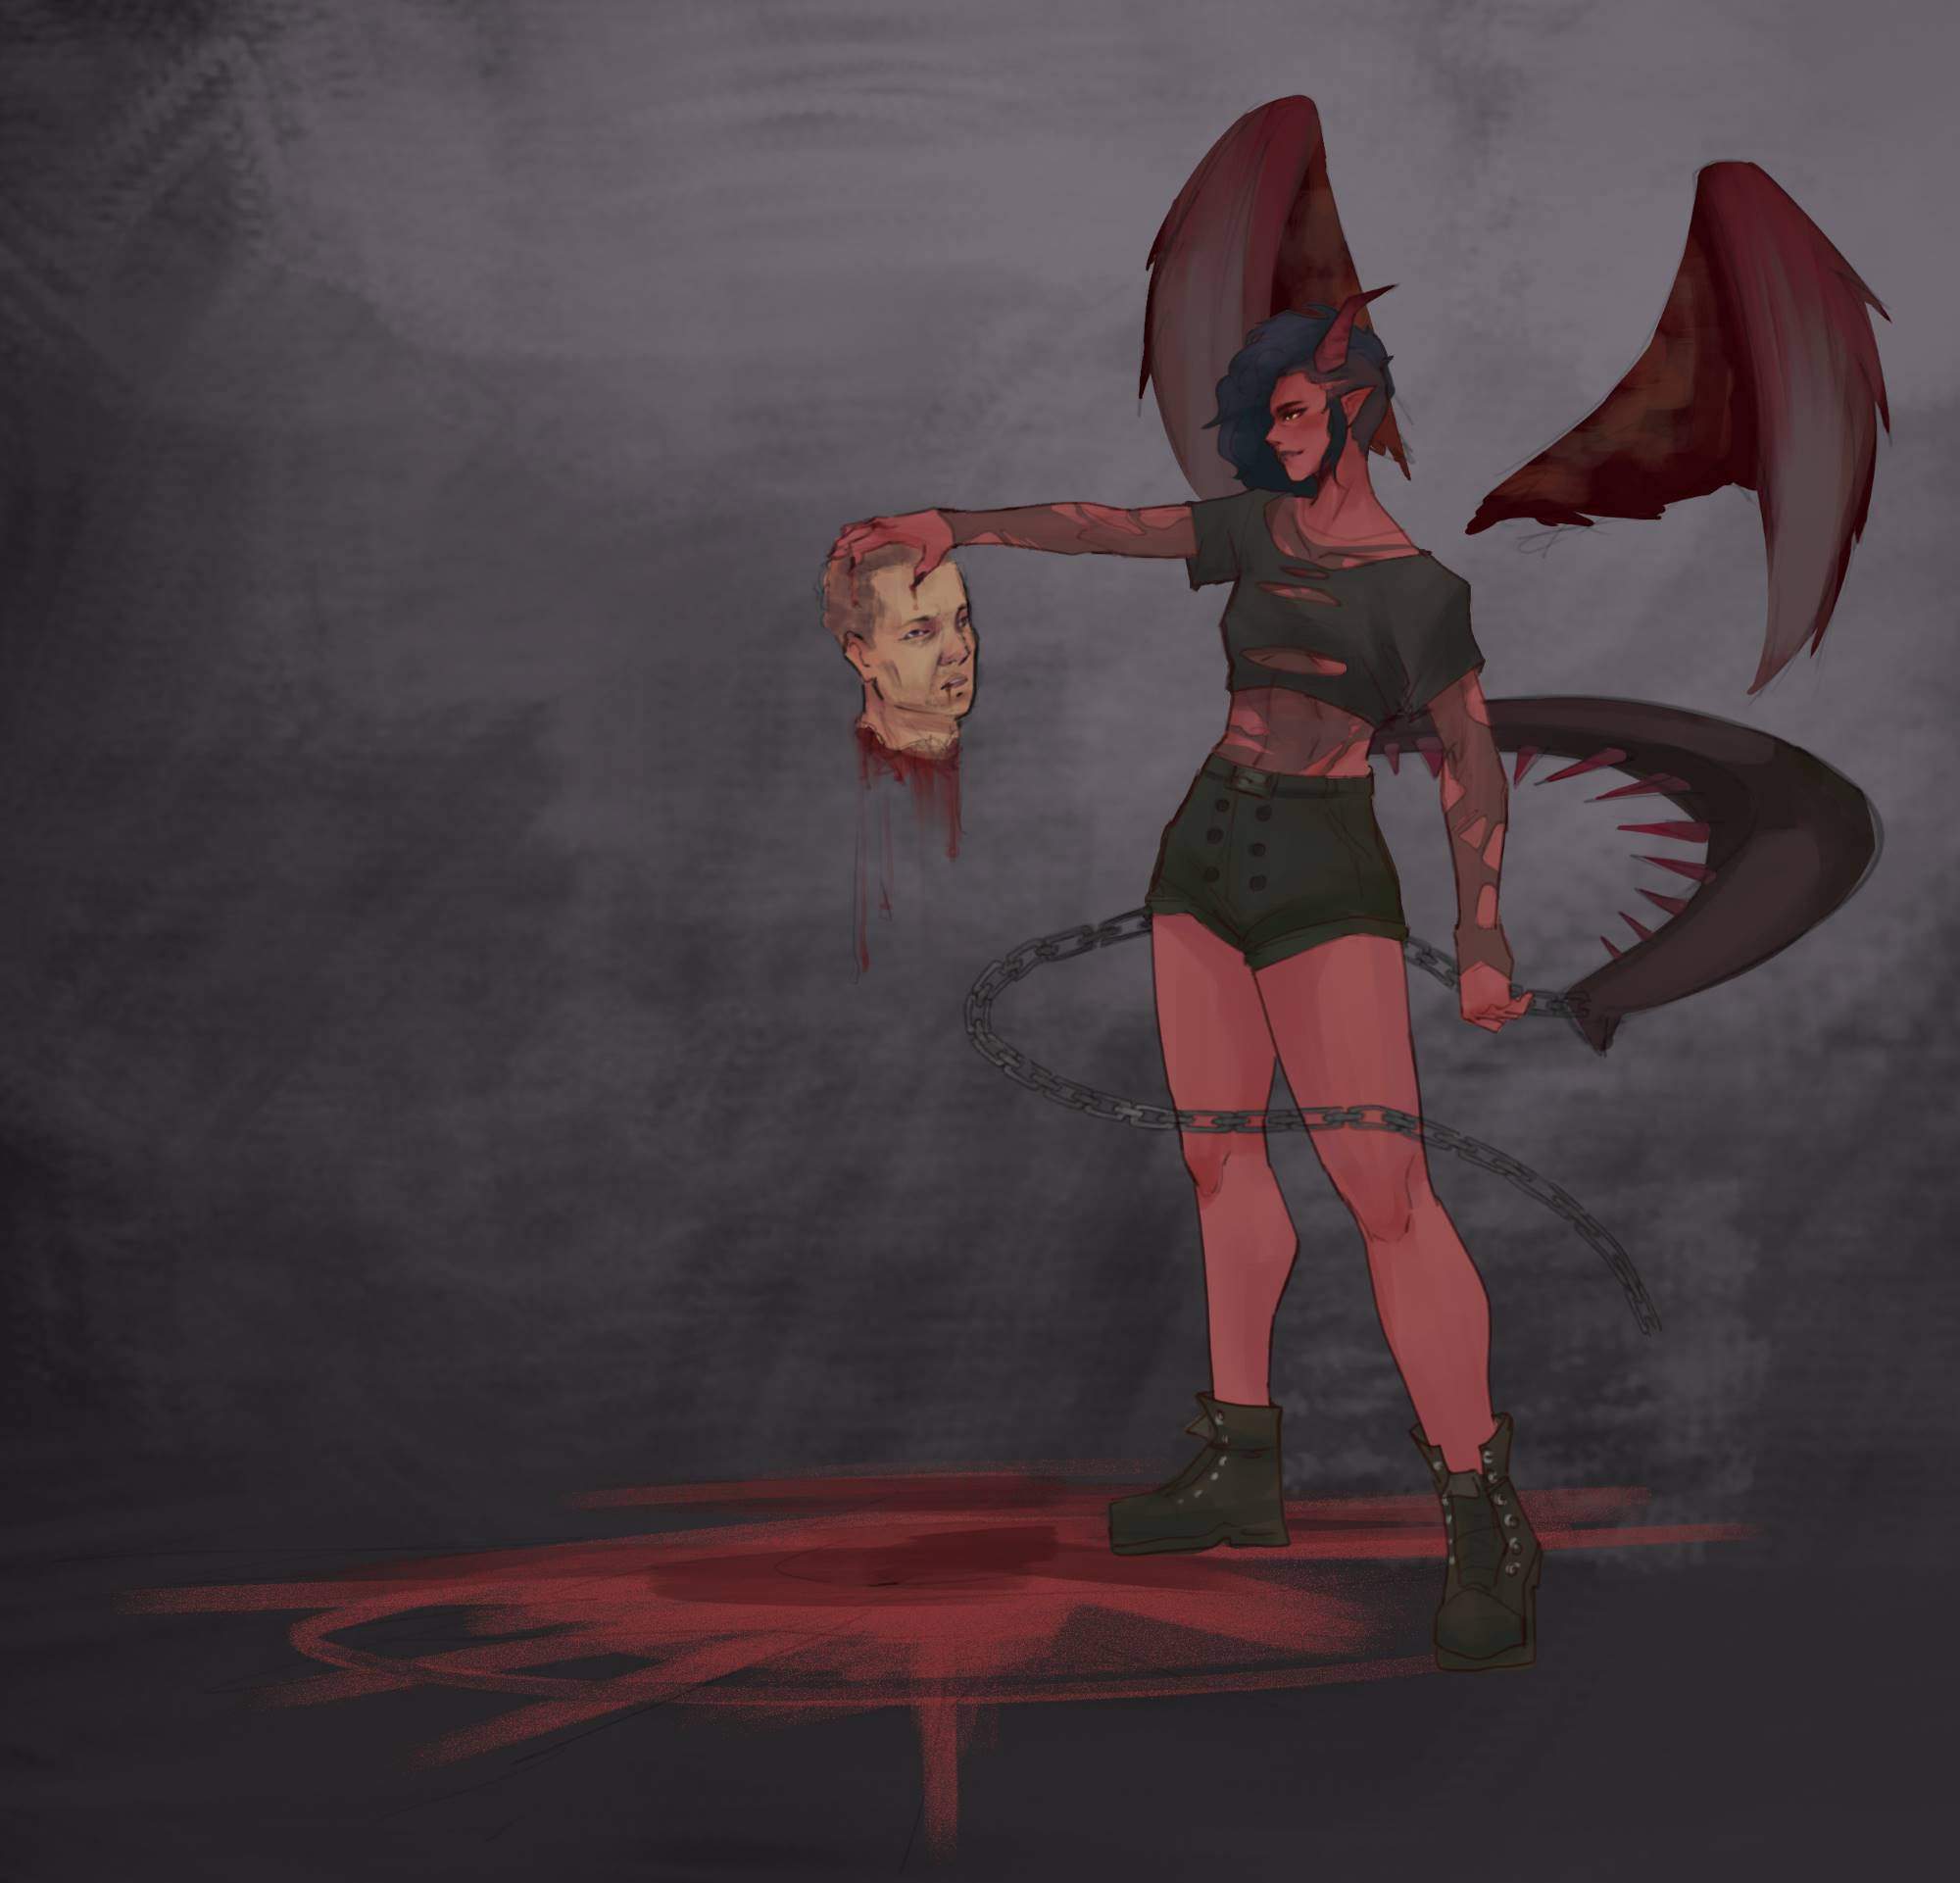 My Demon OC Alicia holding a ripped off head